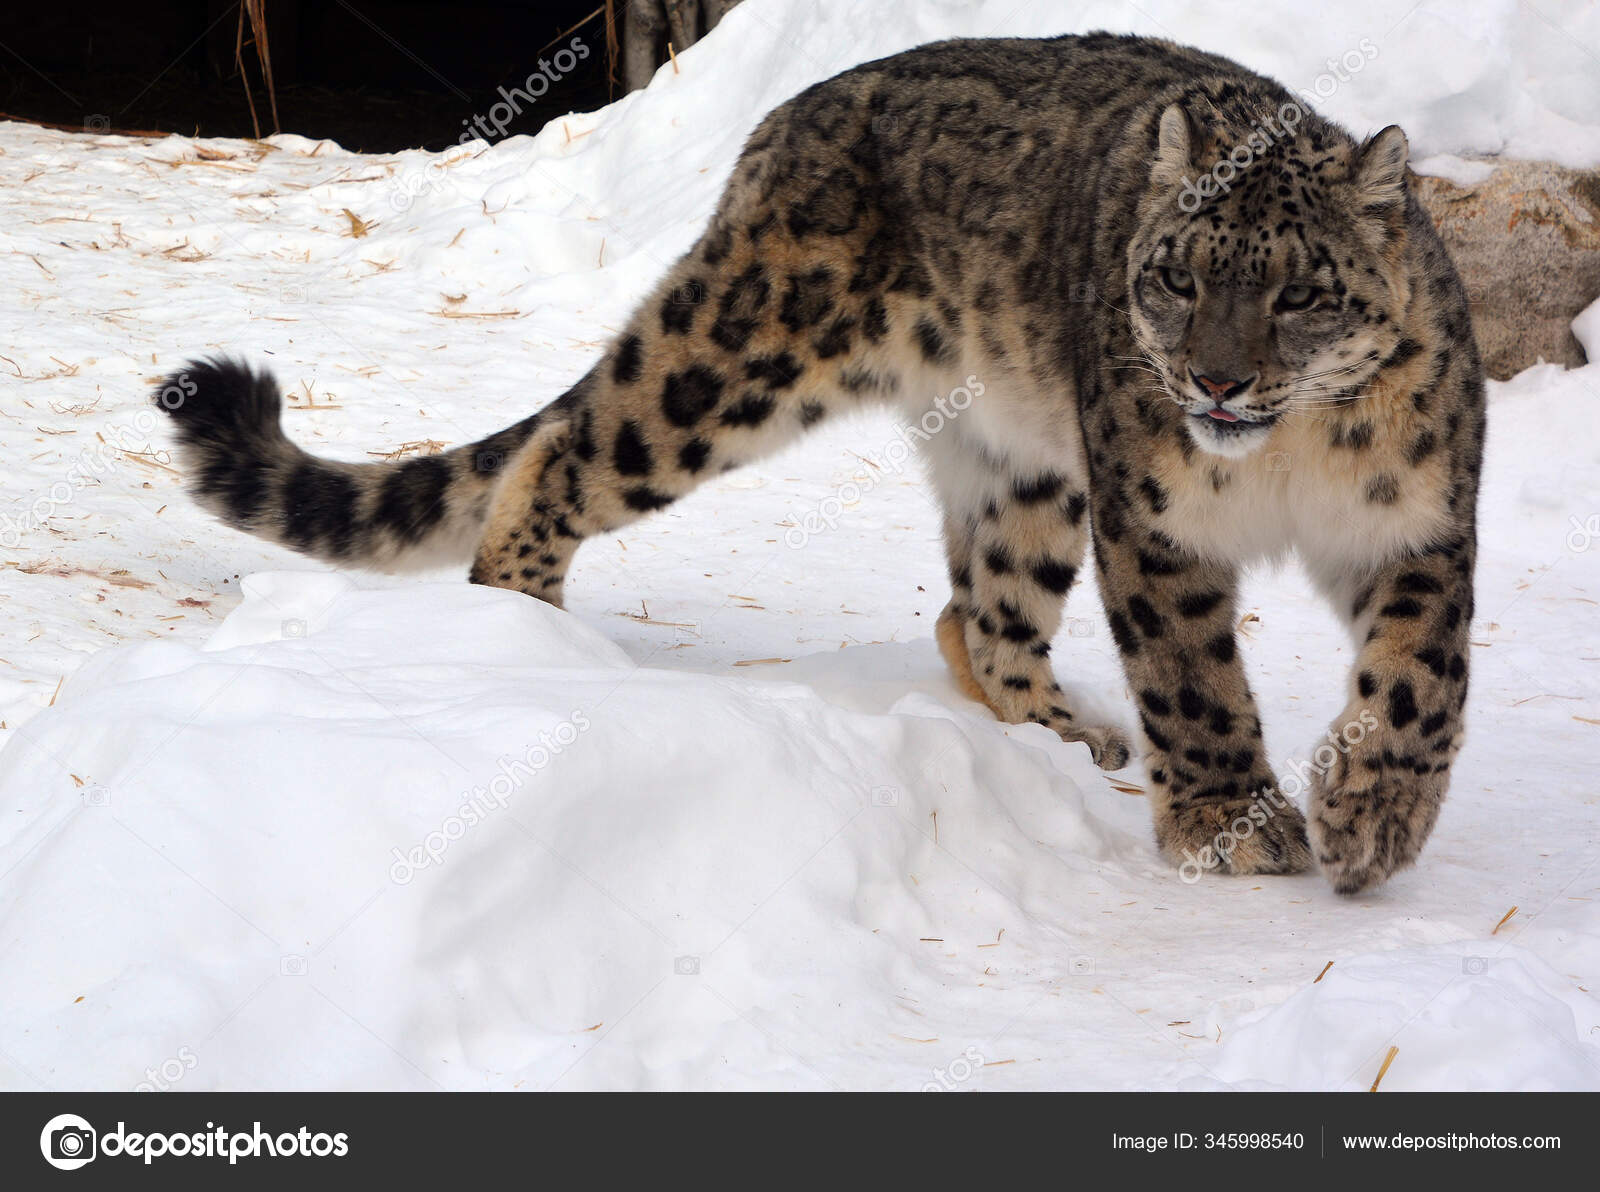 Snow Large Cat Mountain Central South Asia Stock Photo by ©meunierd 345998540